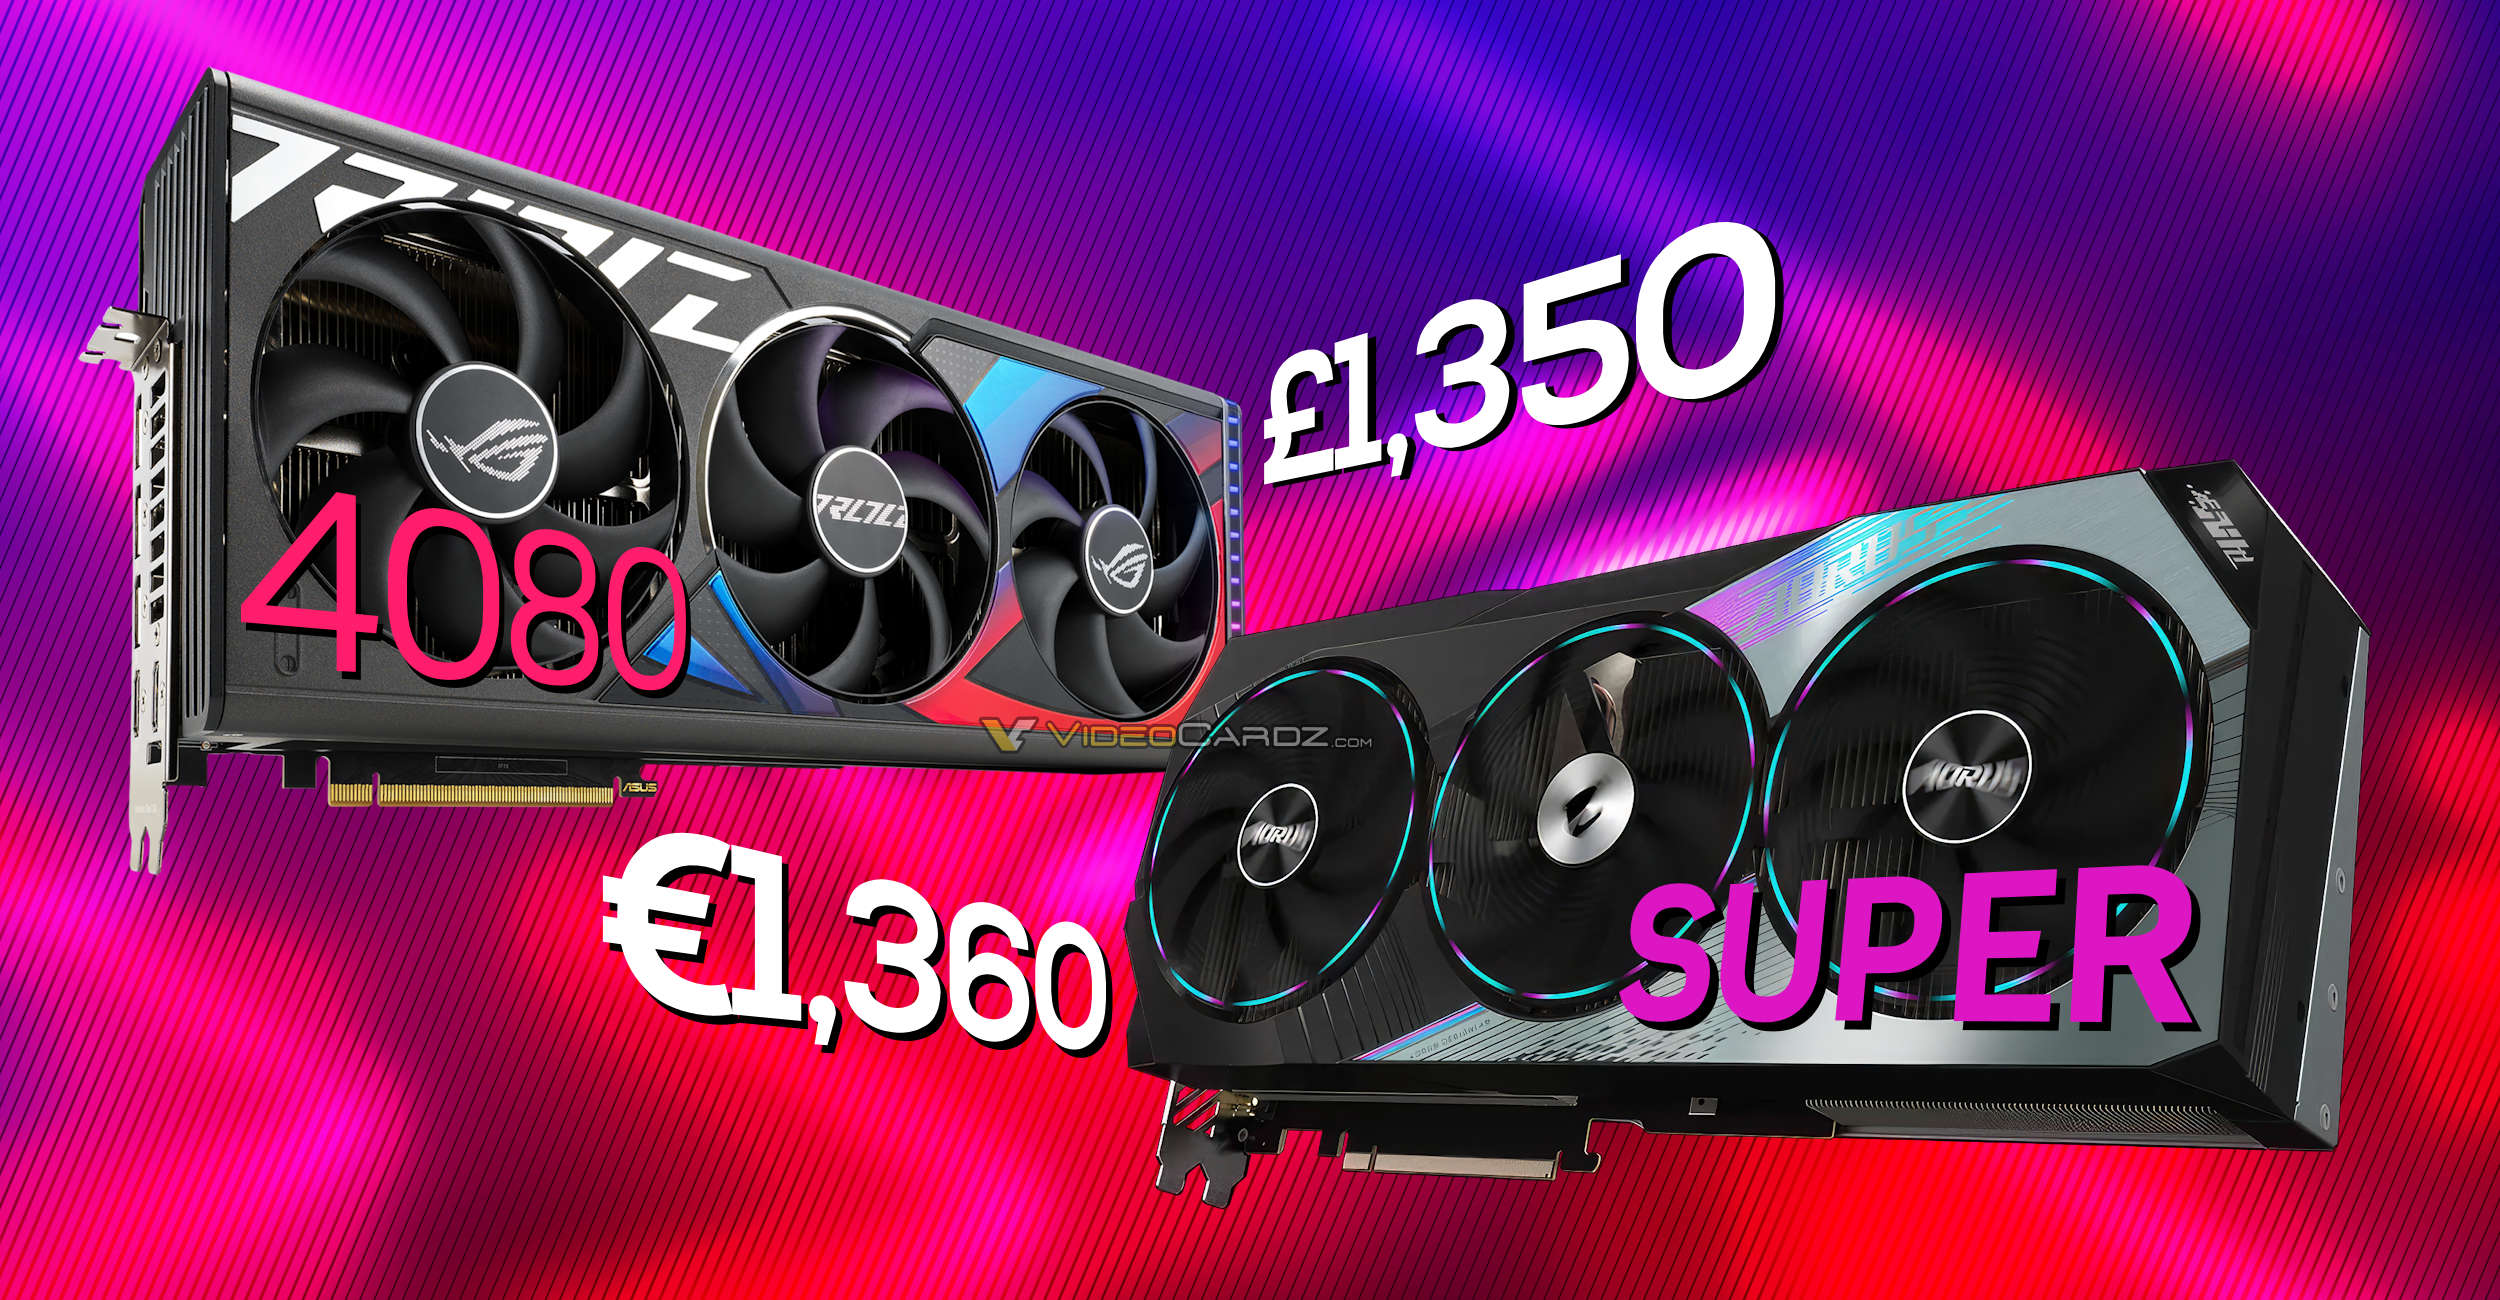 The ASUS ROG STRIX RTX 4080 SUPER is priced at £1,350 in the UK, which is 40% higher than the NVIDIA MSRP